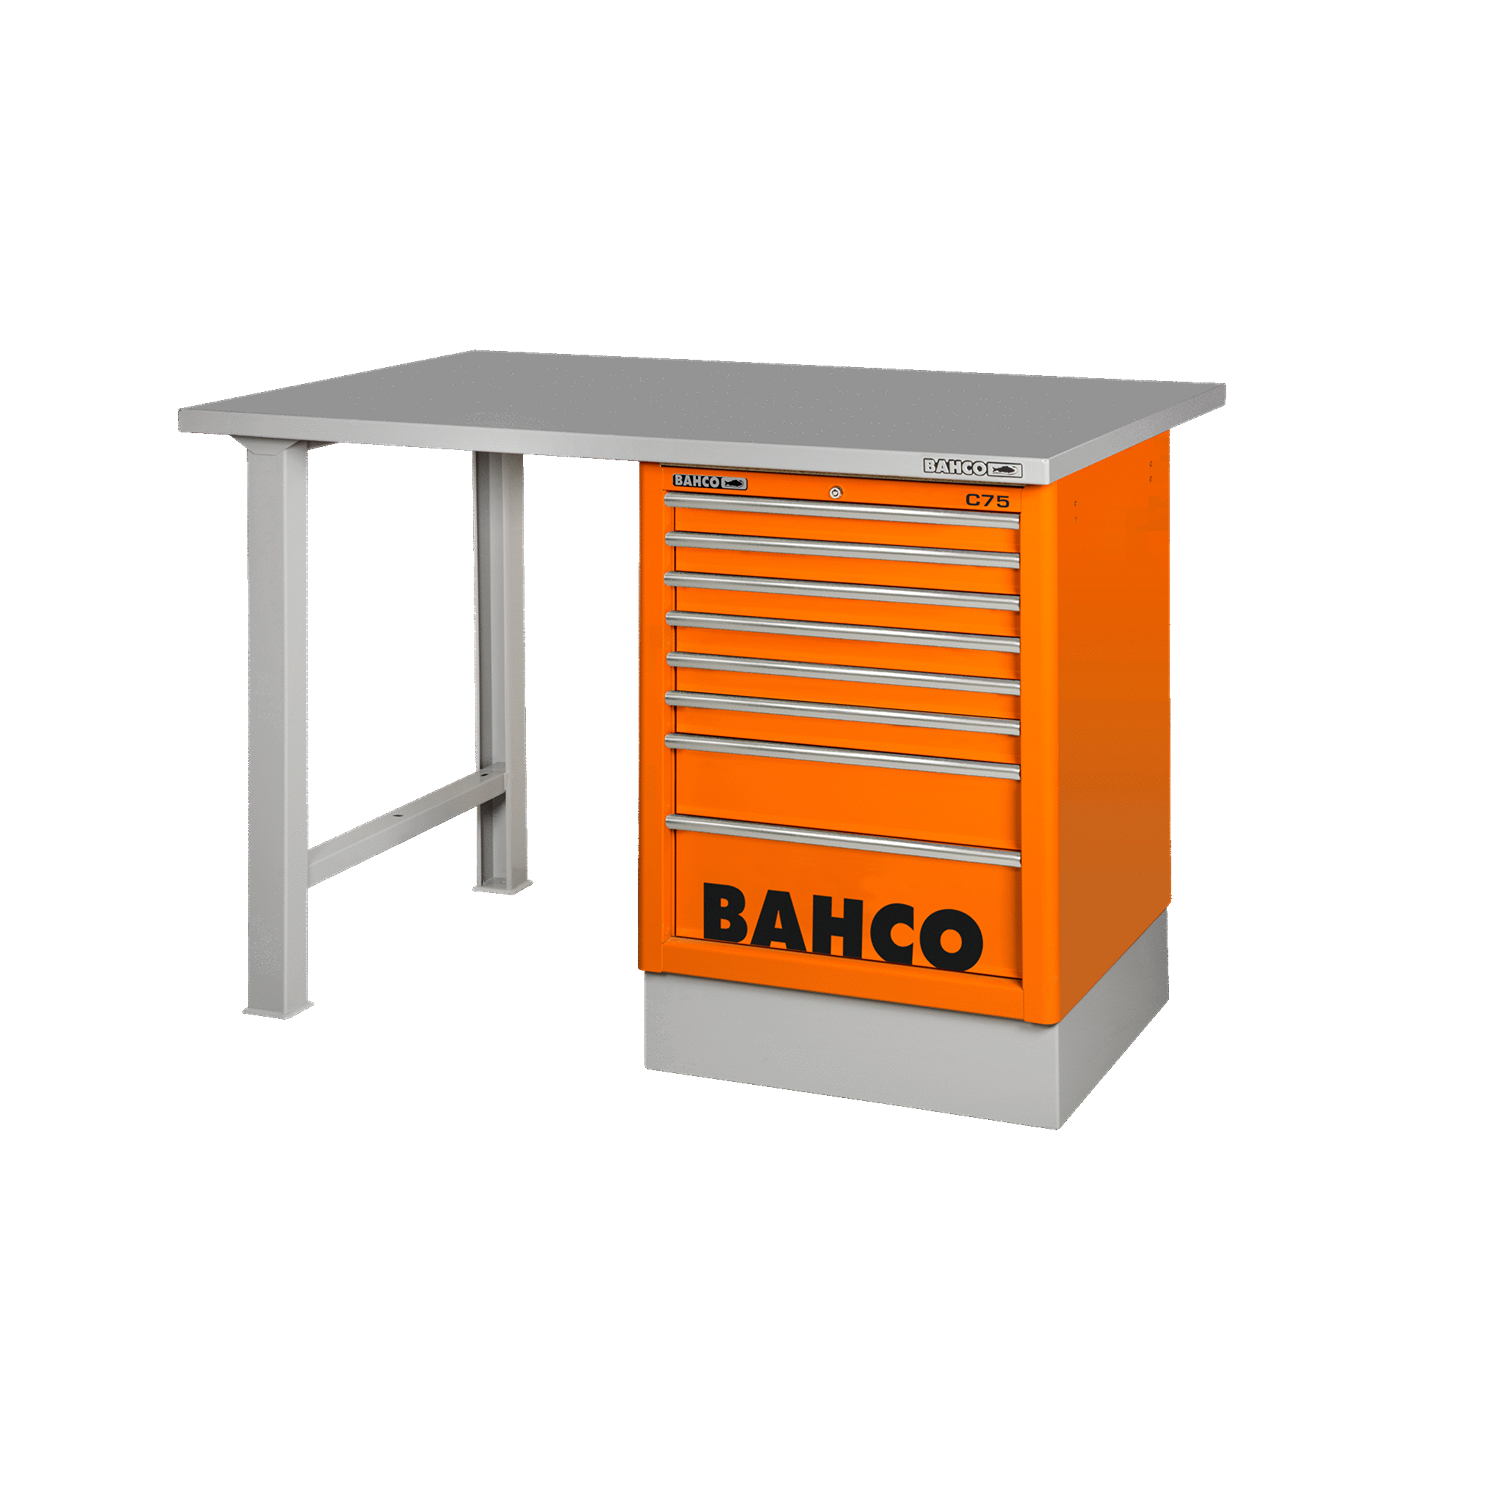 BAHCO 1495KCWB15TS Heavy Duty Steel Top Workbenches with Drawer - Premium Workbench from BAHCO - Shop now at Yew Aik.